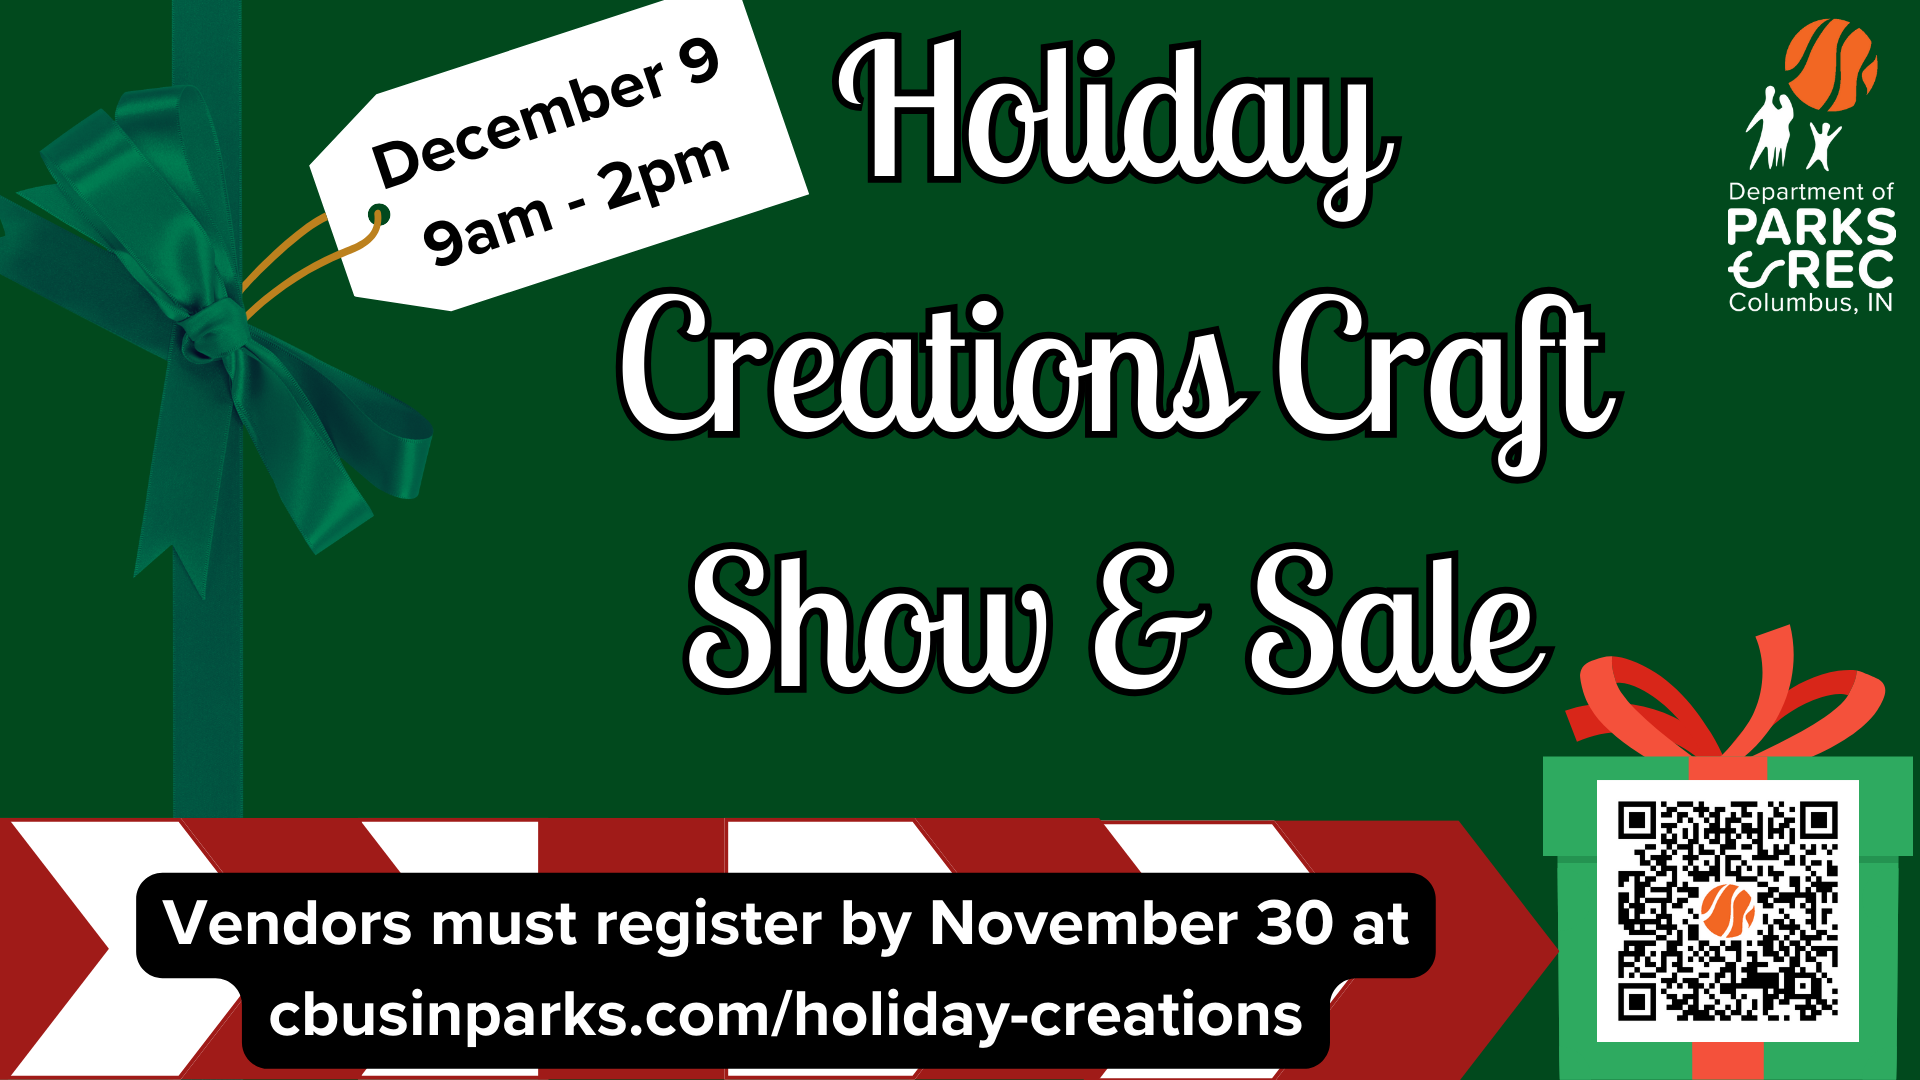 Holiday Creations Craft Show & Sale: December 9, 9am-2pm at Donner Center. Vendors must register by November 30 at cbusinparks.com/holiday-creations